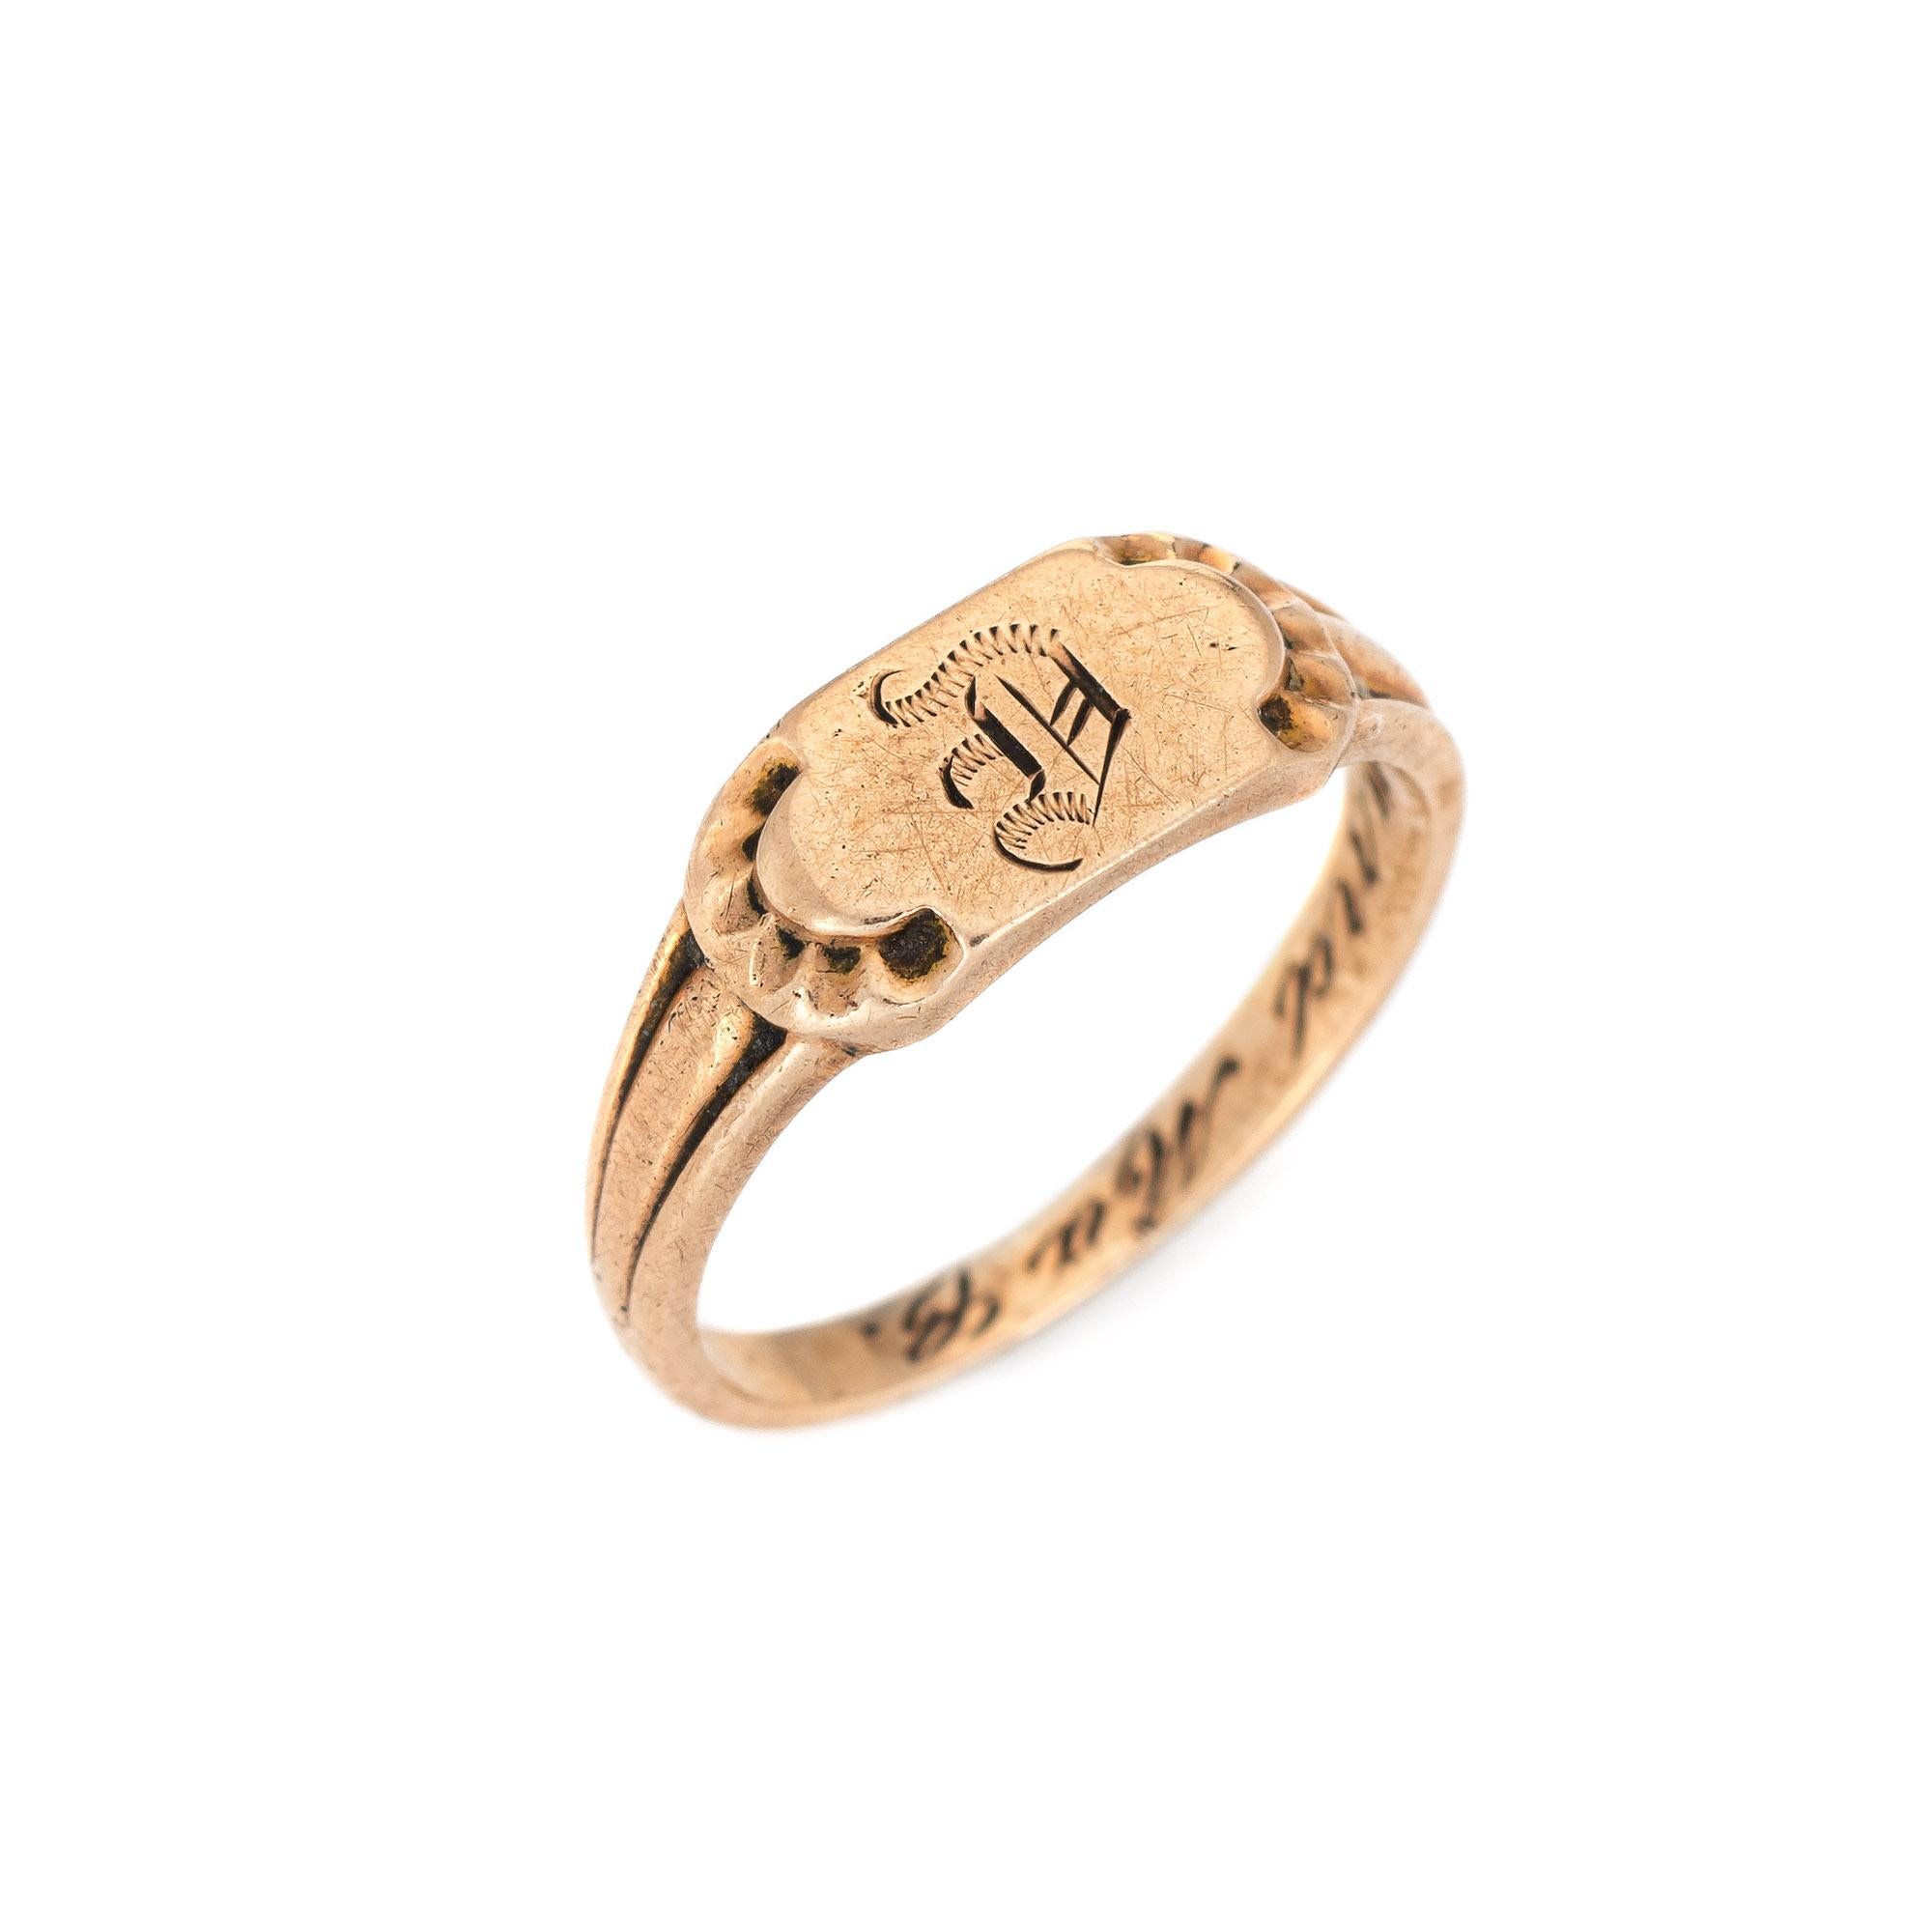 Finely detailed vintage Art Deco baby ring (circa 1920s to 1930s) crafted in 10k rose gold. 

The sweet Art Deco era baby signet ring is engraved with the letter 'D' in old cursive font. The side shoulders feature scalloped detail with the inner